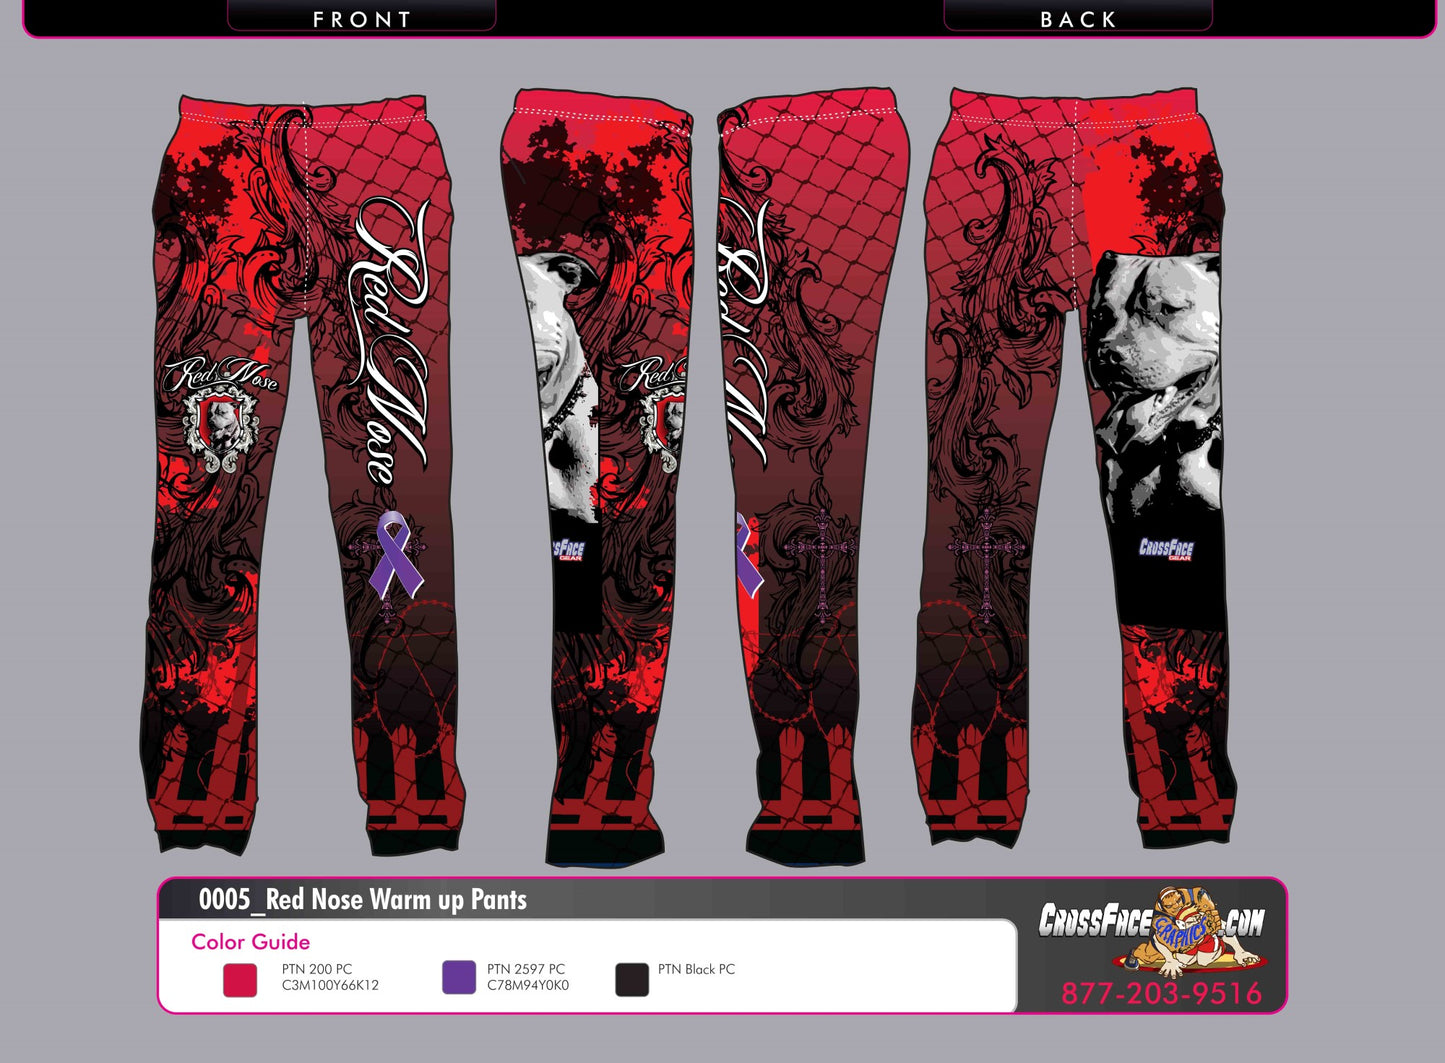 Red Nose Wrestling Full Sublimated Warm Up Pants 2017